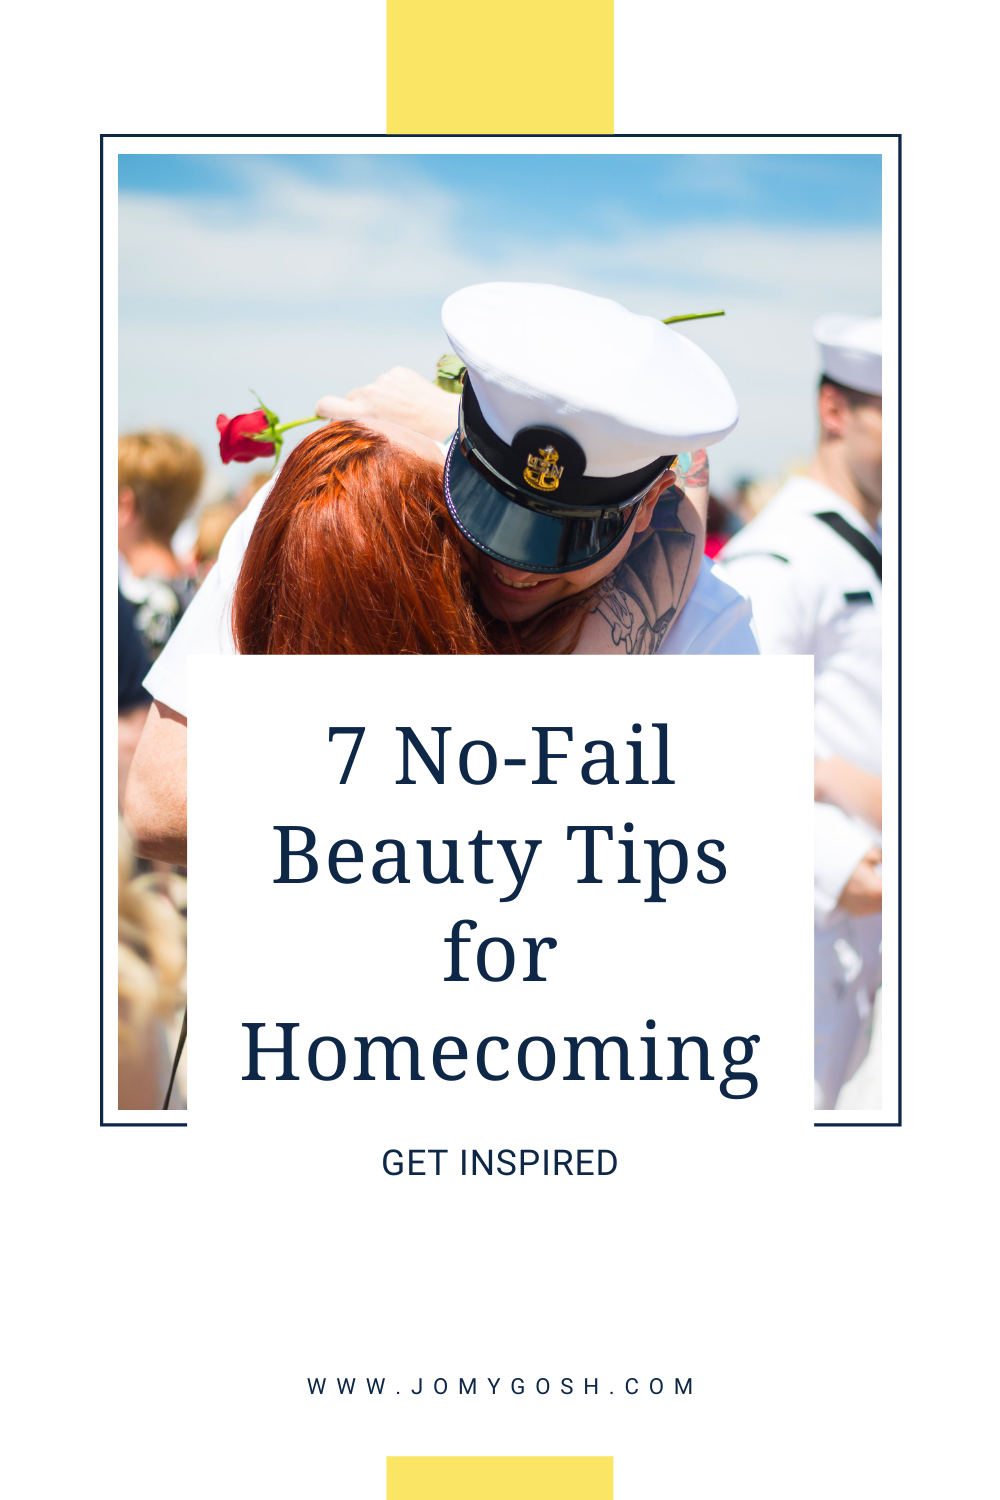 Saving for getting ready for homecoming, beauty and planning tips for milspouses